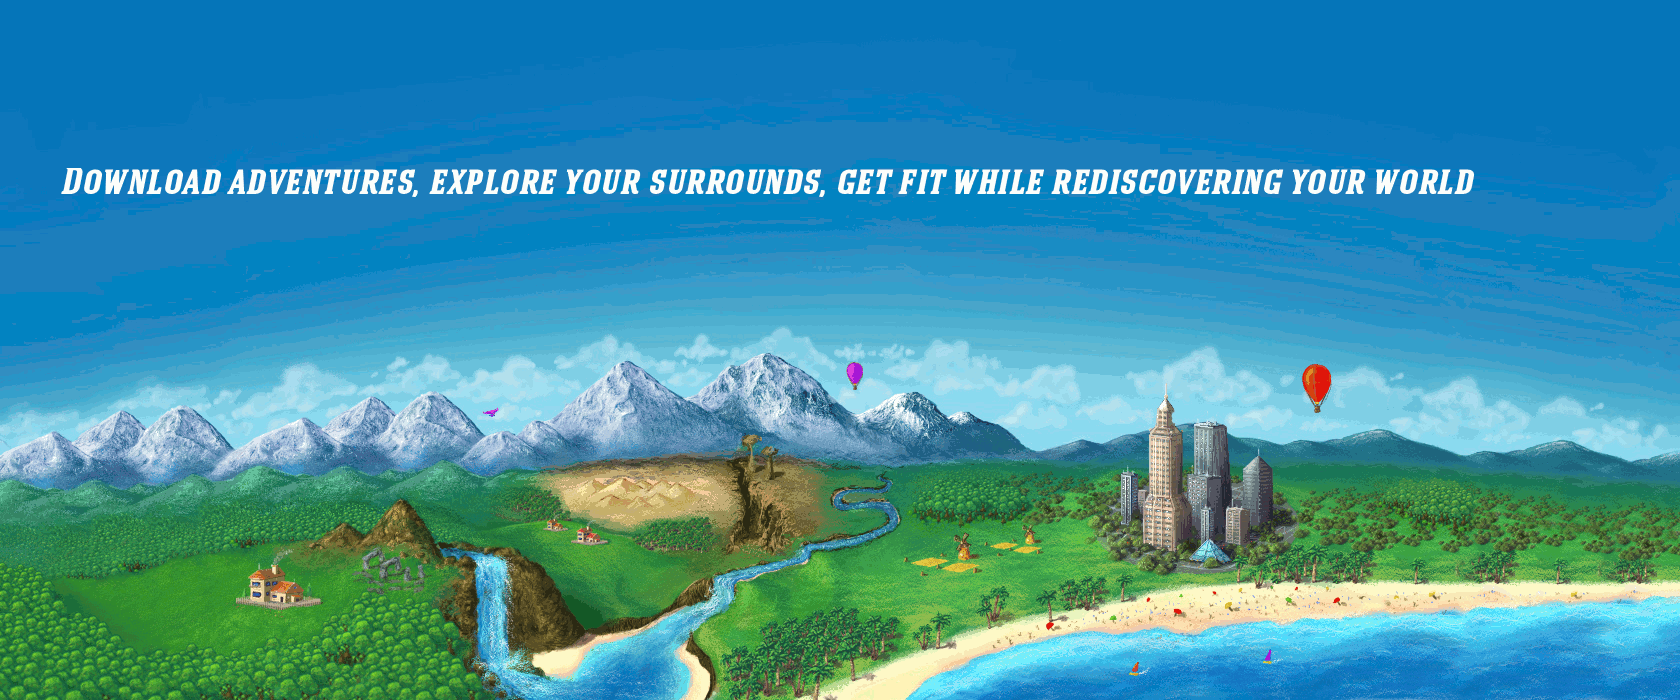 Download adventures, explore your surrounds, get fit while rediscovering your world